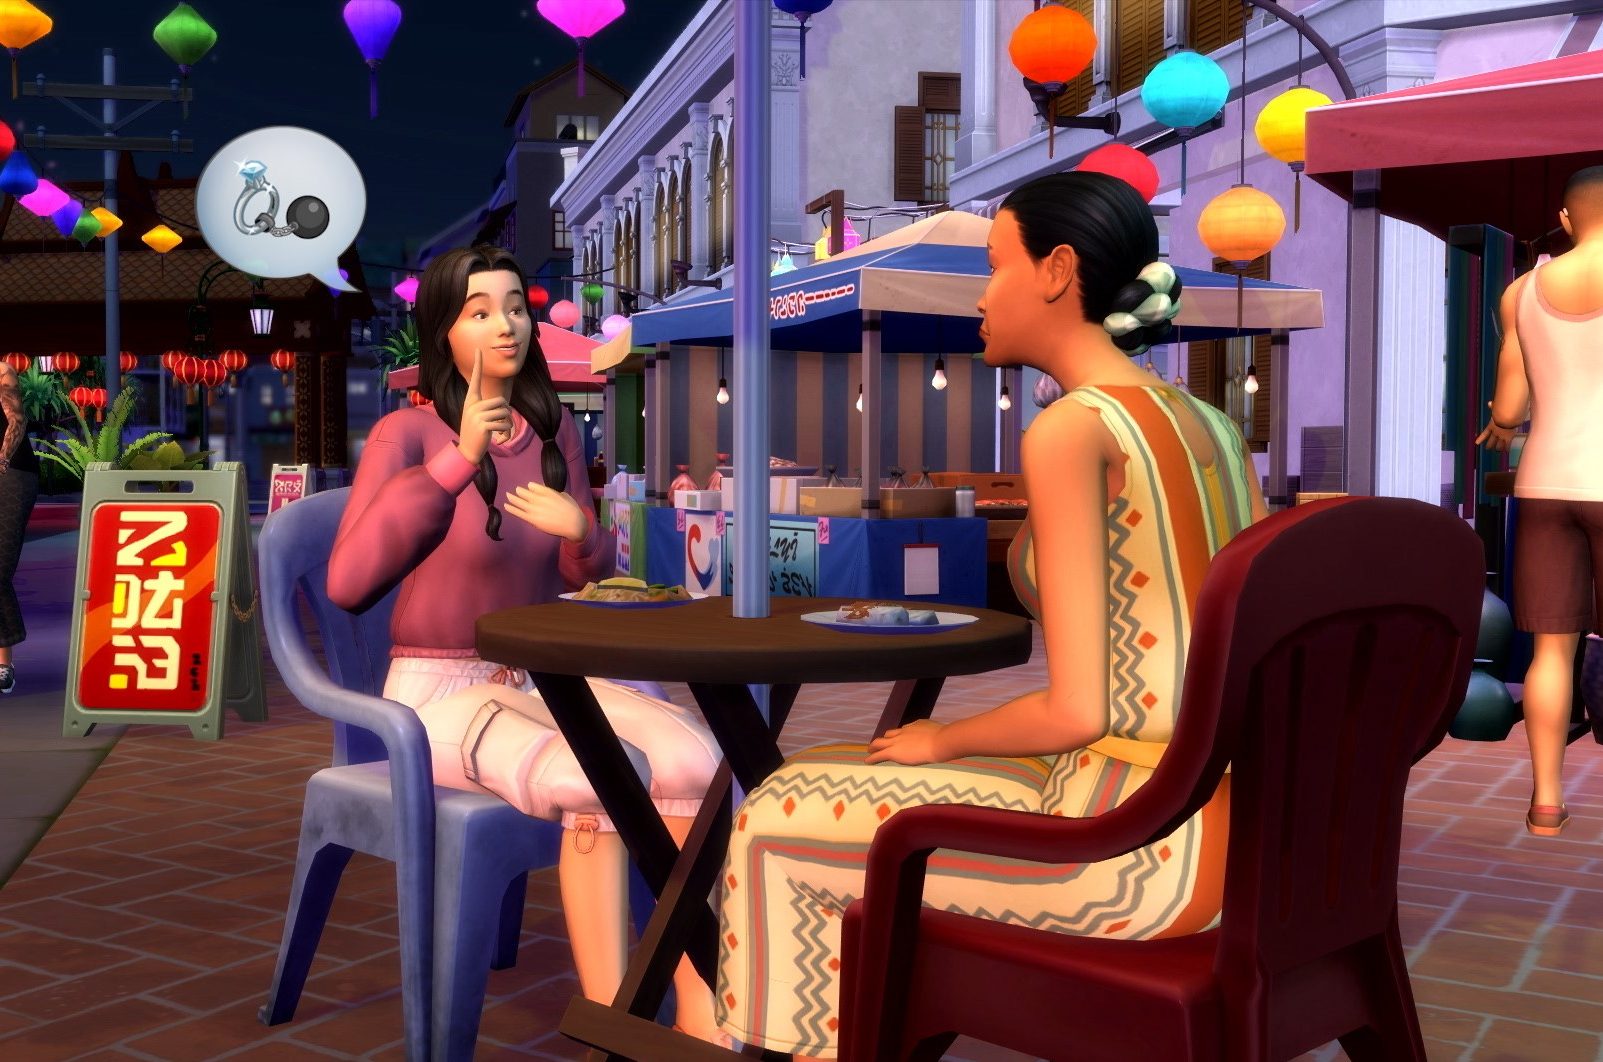 Two Sims sit at an outdoor cafe table at night, chatting.